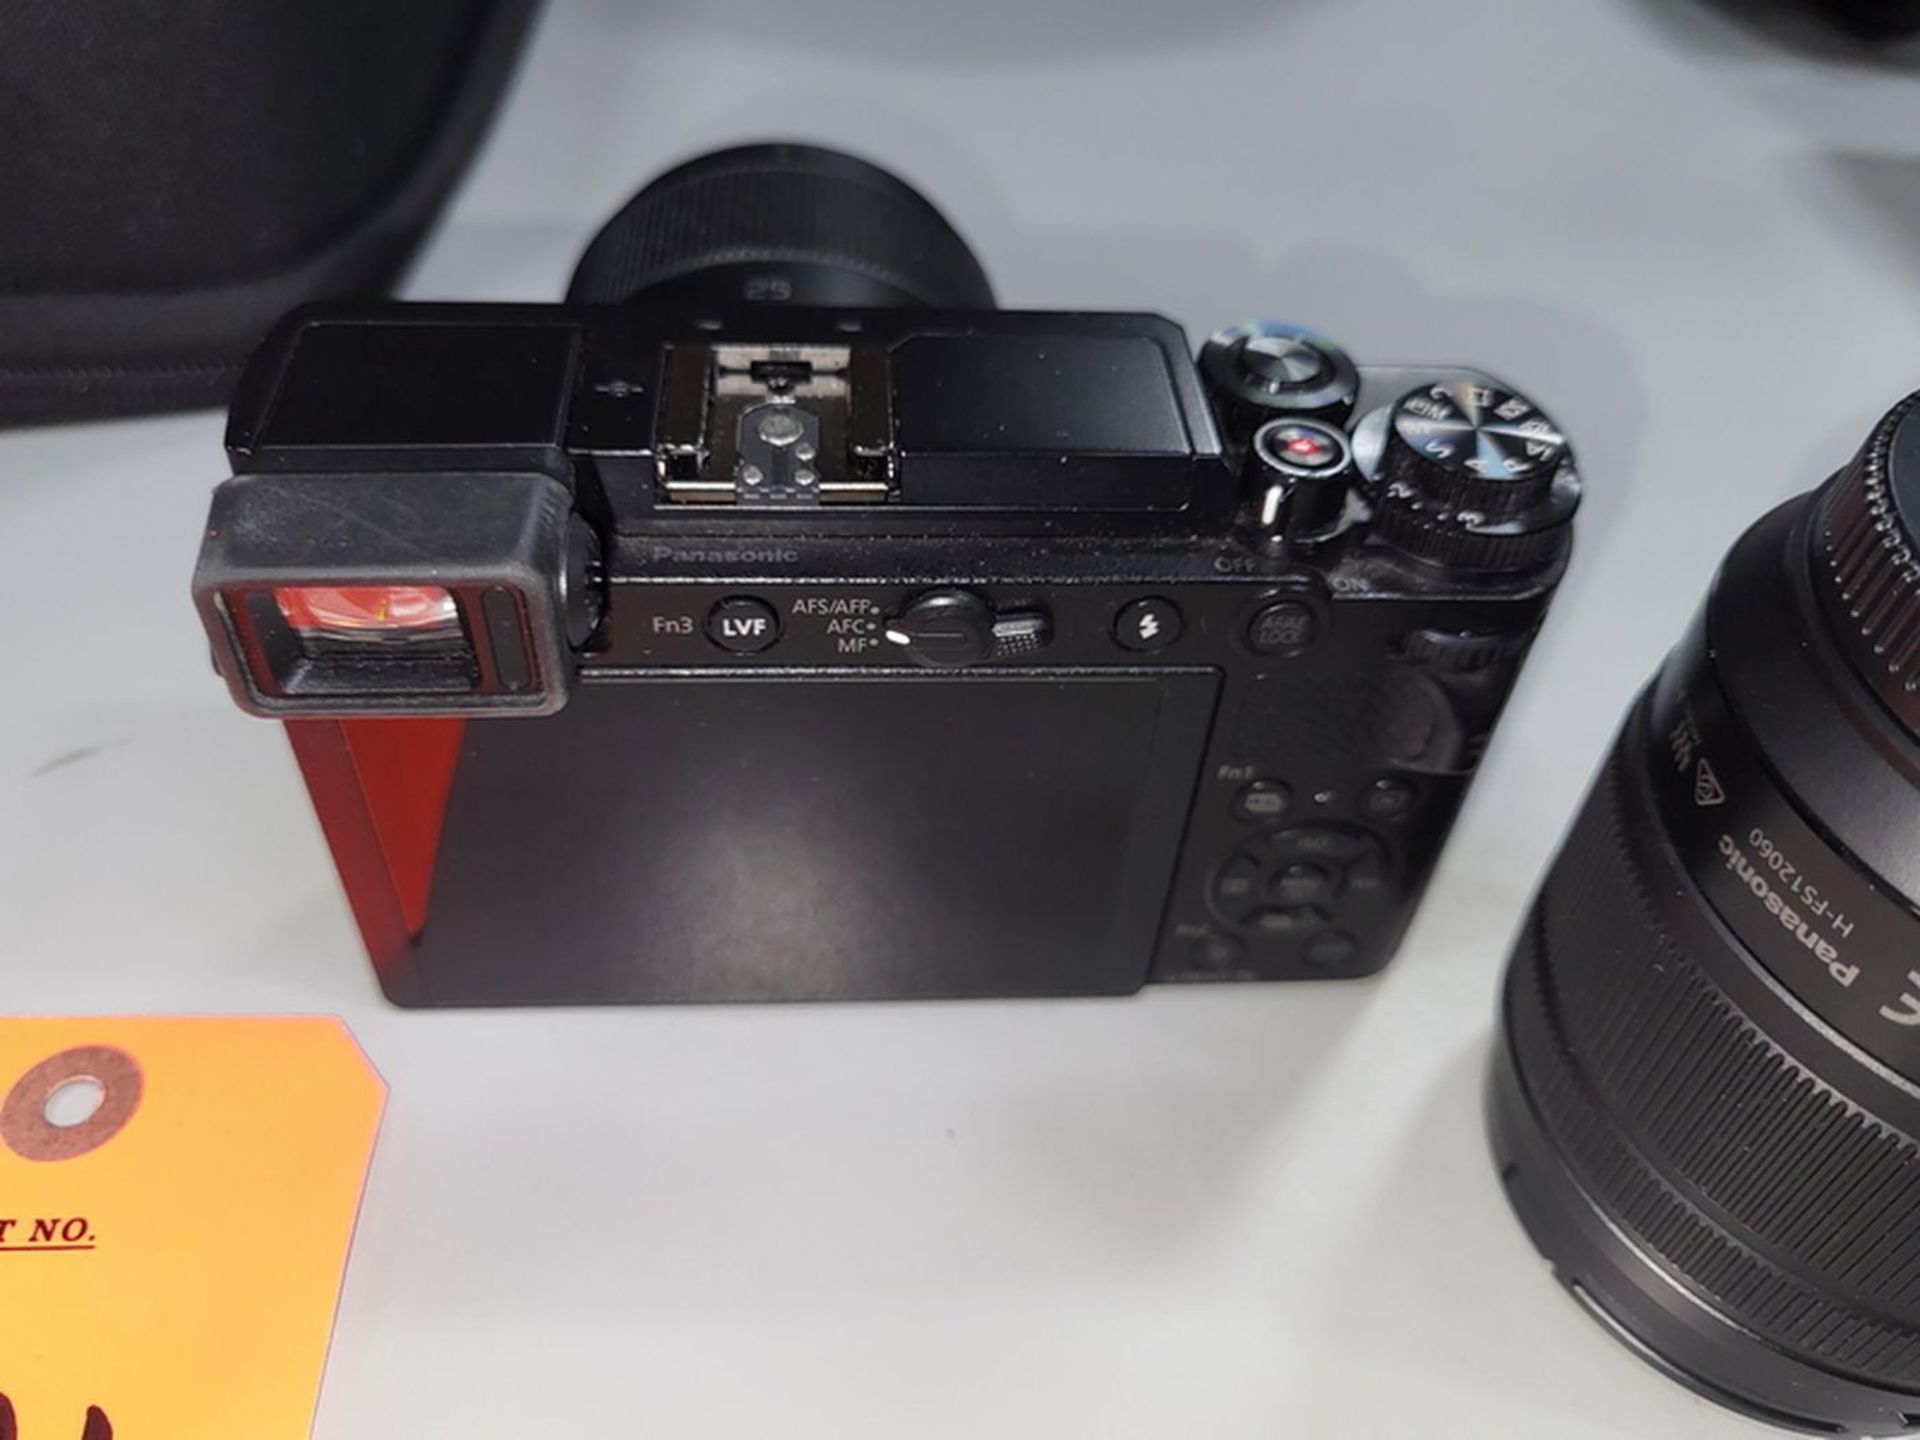 Lumix Digital Camera; with Lumix 25 mm Lens, Spare 12-60 mm Lens, Battery (No Charger) - Image 2 of 2